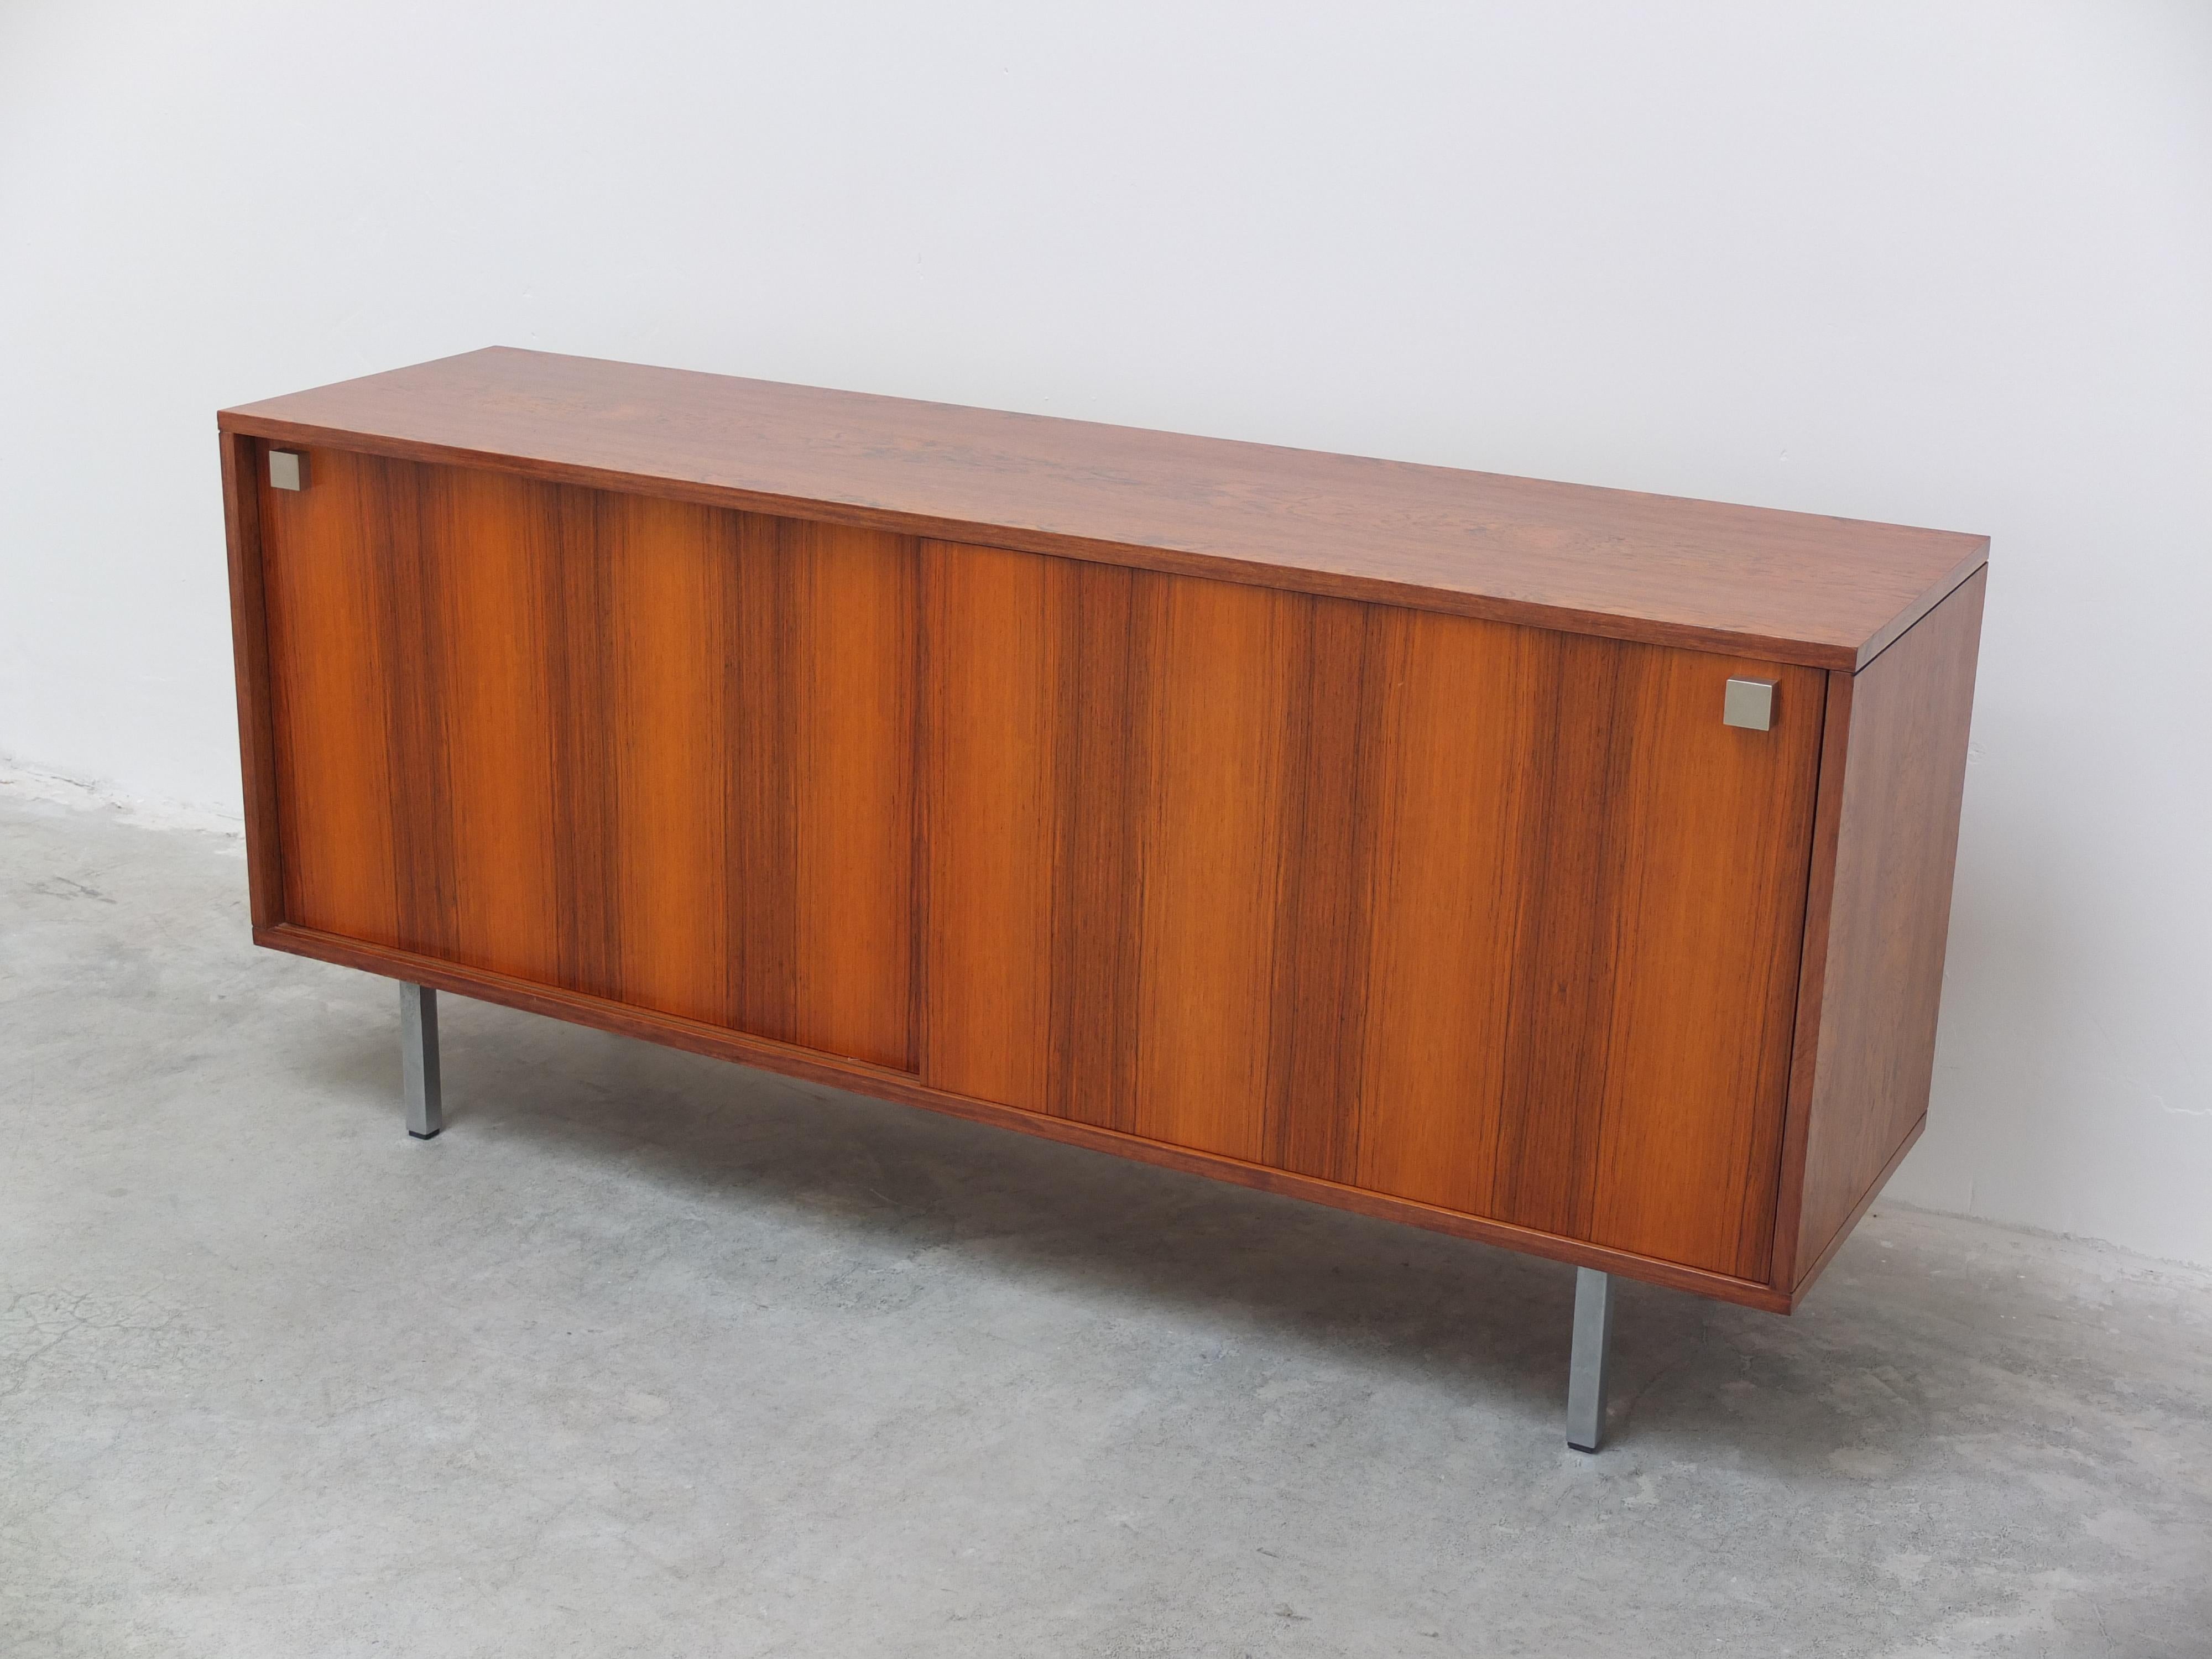 Nice medium sized sideboard designed by Alfred Hendrickx for Belform, 1960s. Made of rosewood with a beautiful woodgrain and metal feet. This model features two sliding doors with two rosewood drawers on the right side. Notable here is the compact